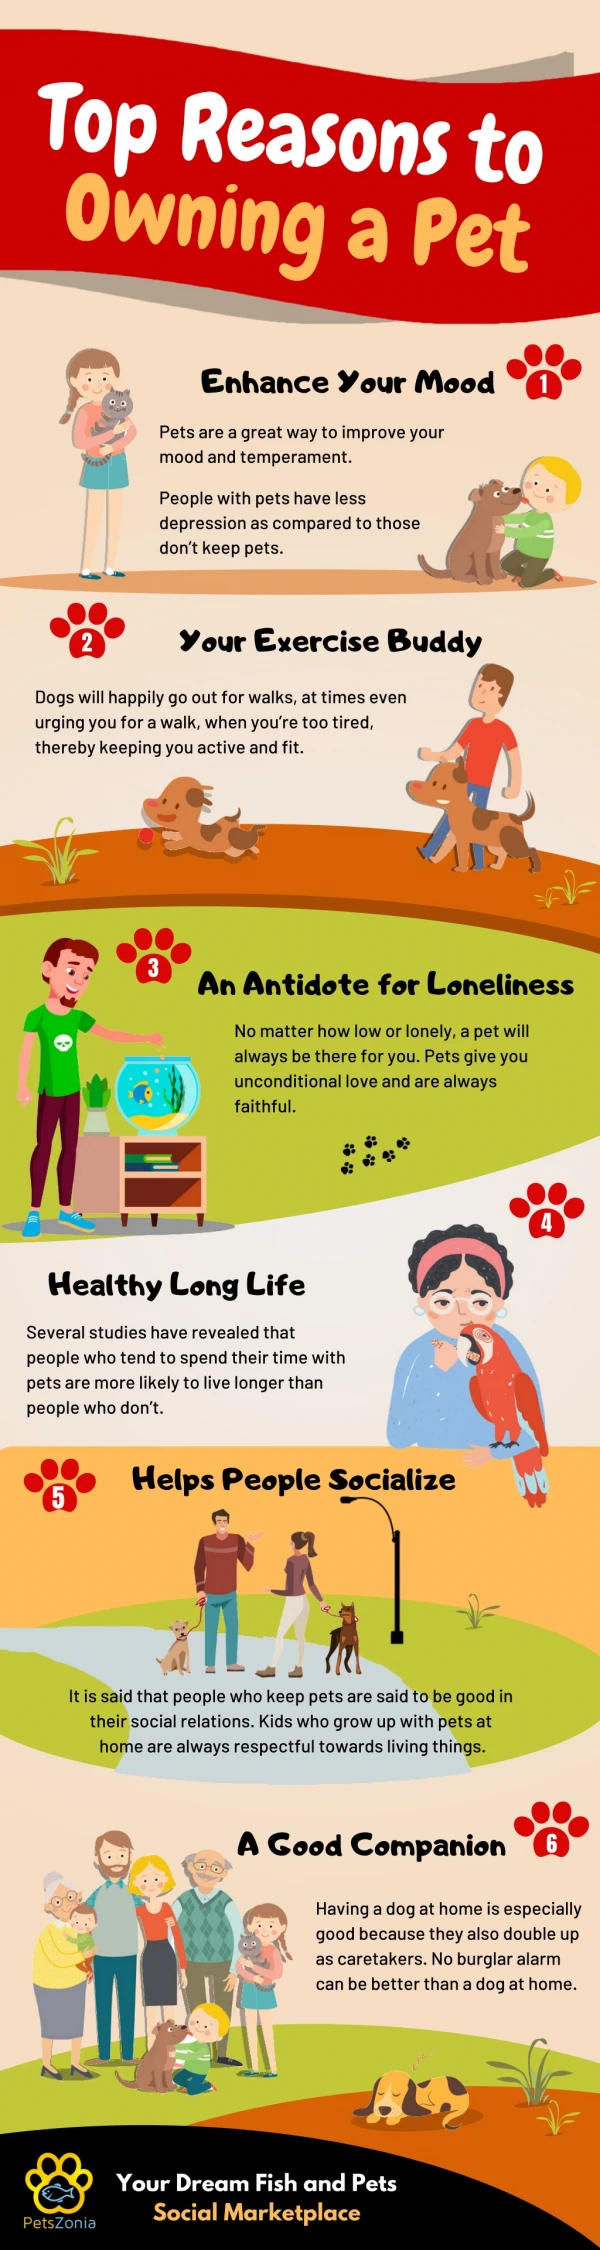 Reasons Why Keeping a Pet Is a Good Idea